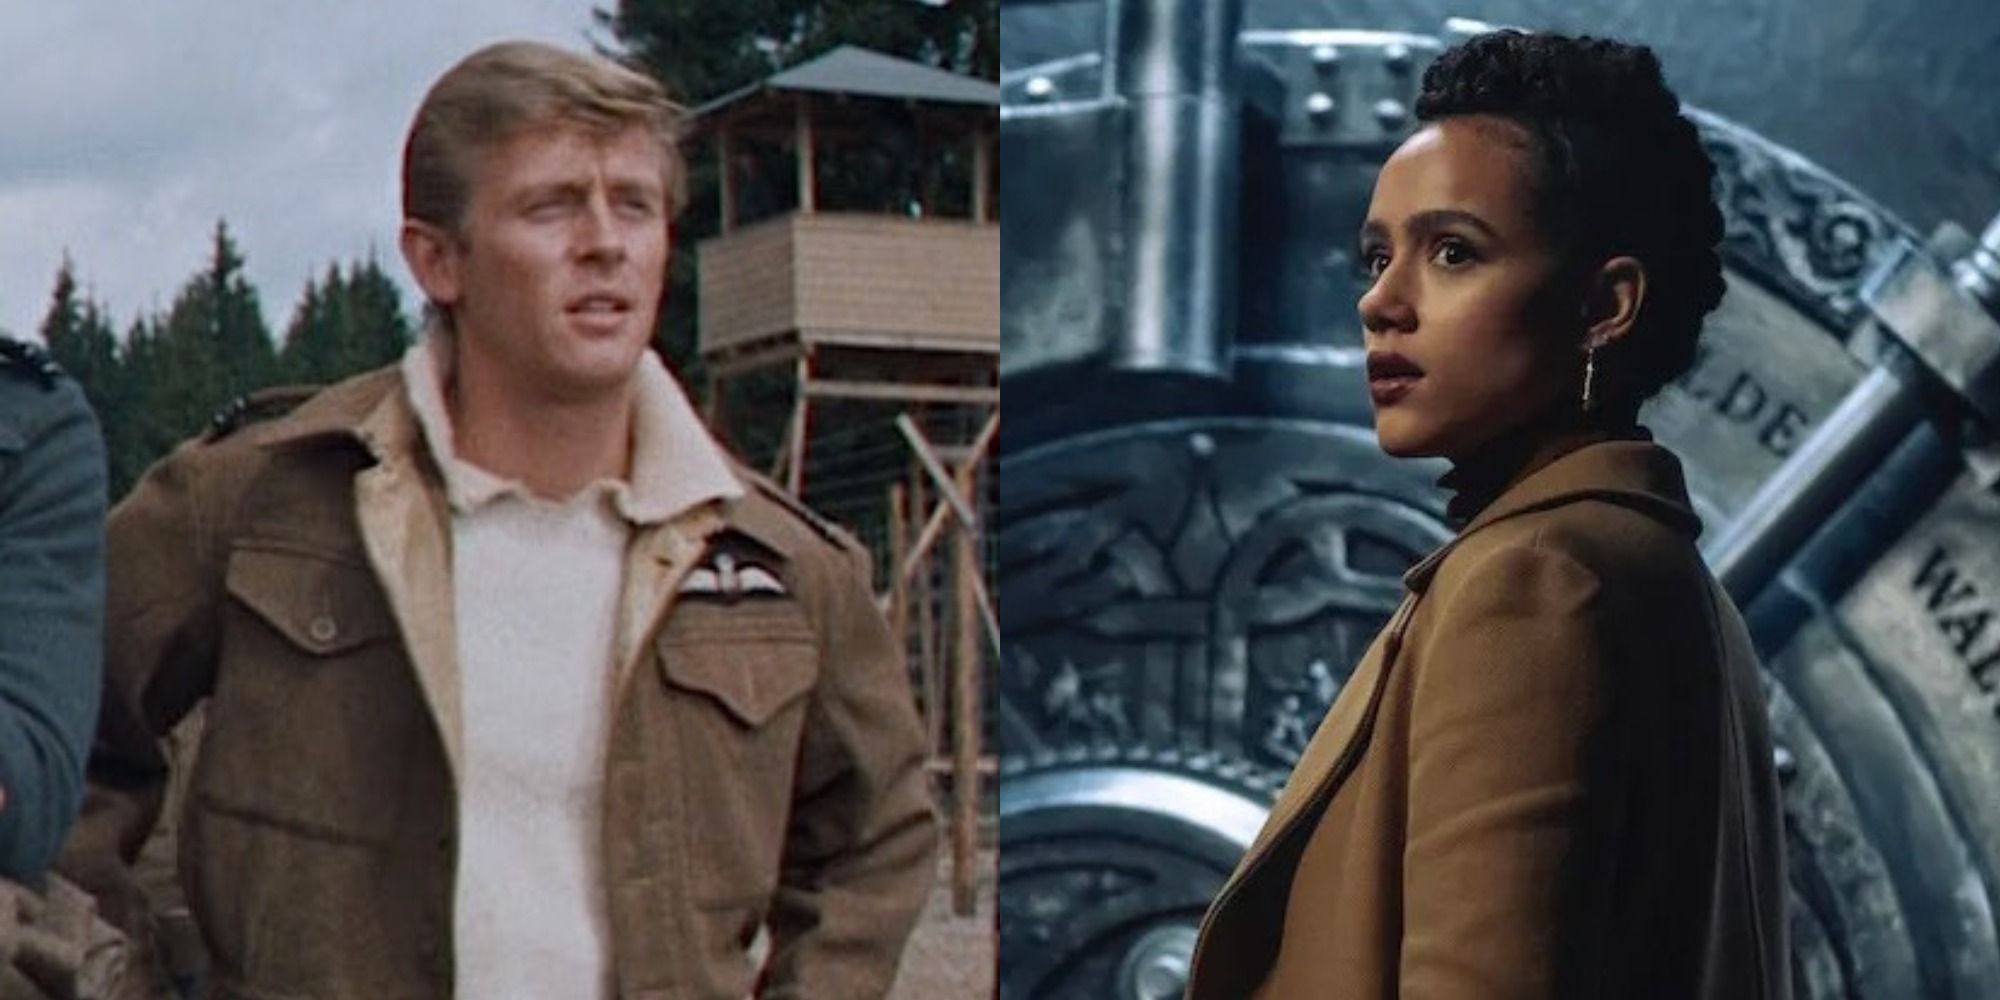 Split image of John Leyton in The Great Escape and Nathalie Emmanuel in Army of Thieves 